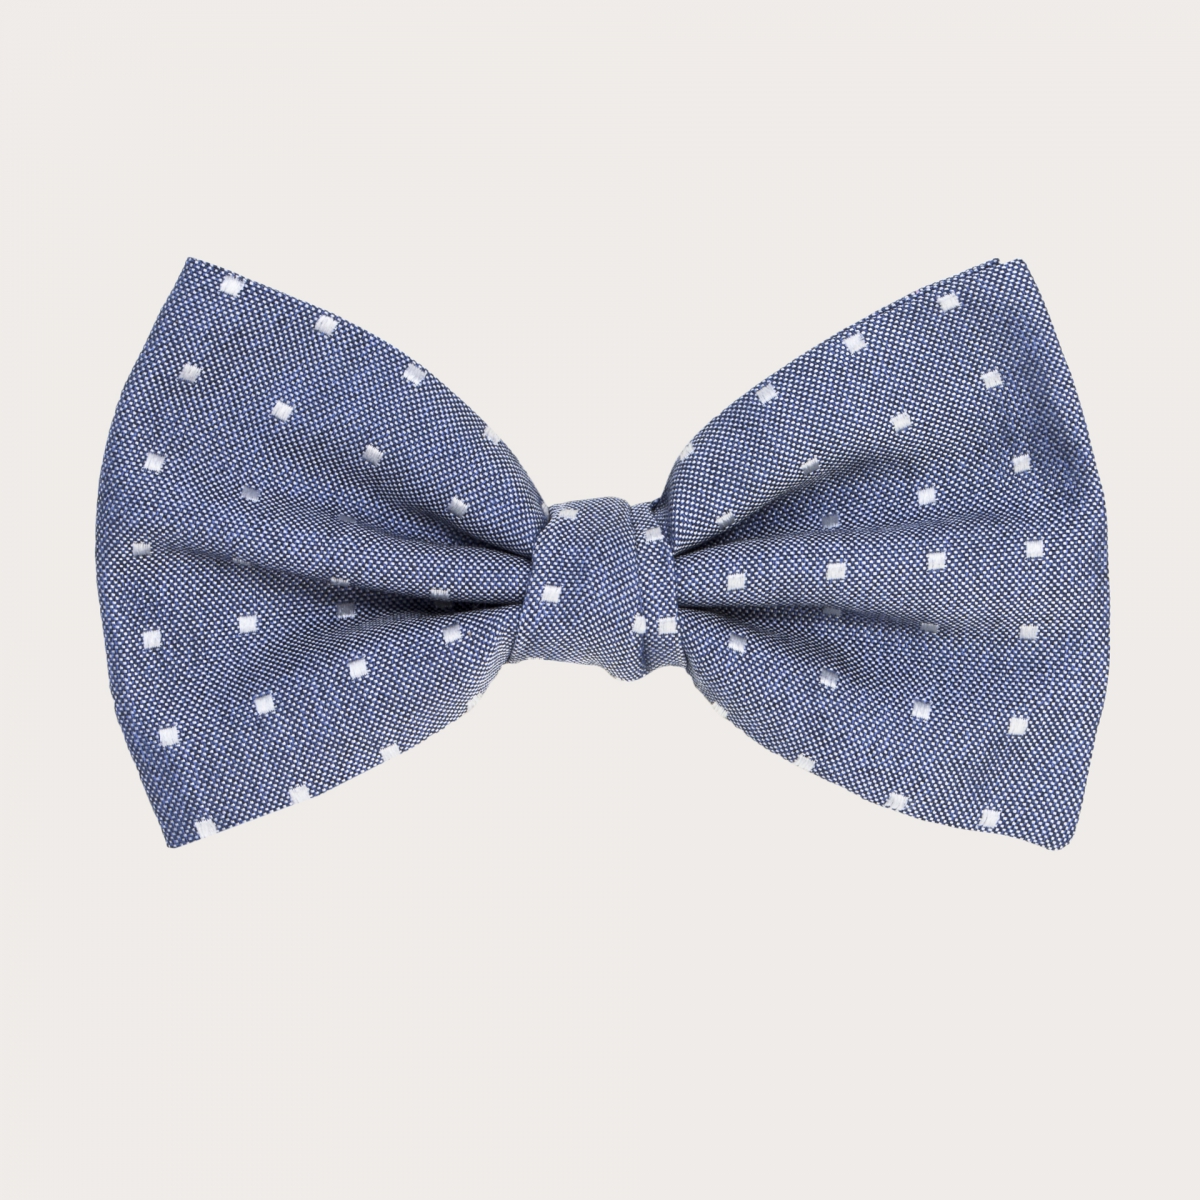 Ceremony bow tie in jacquard silk, light blue with dots